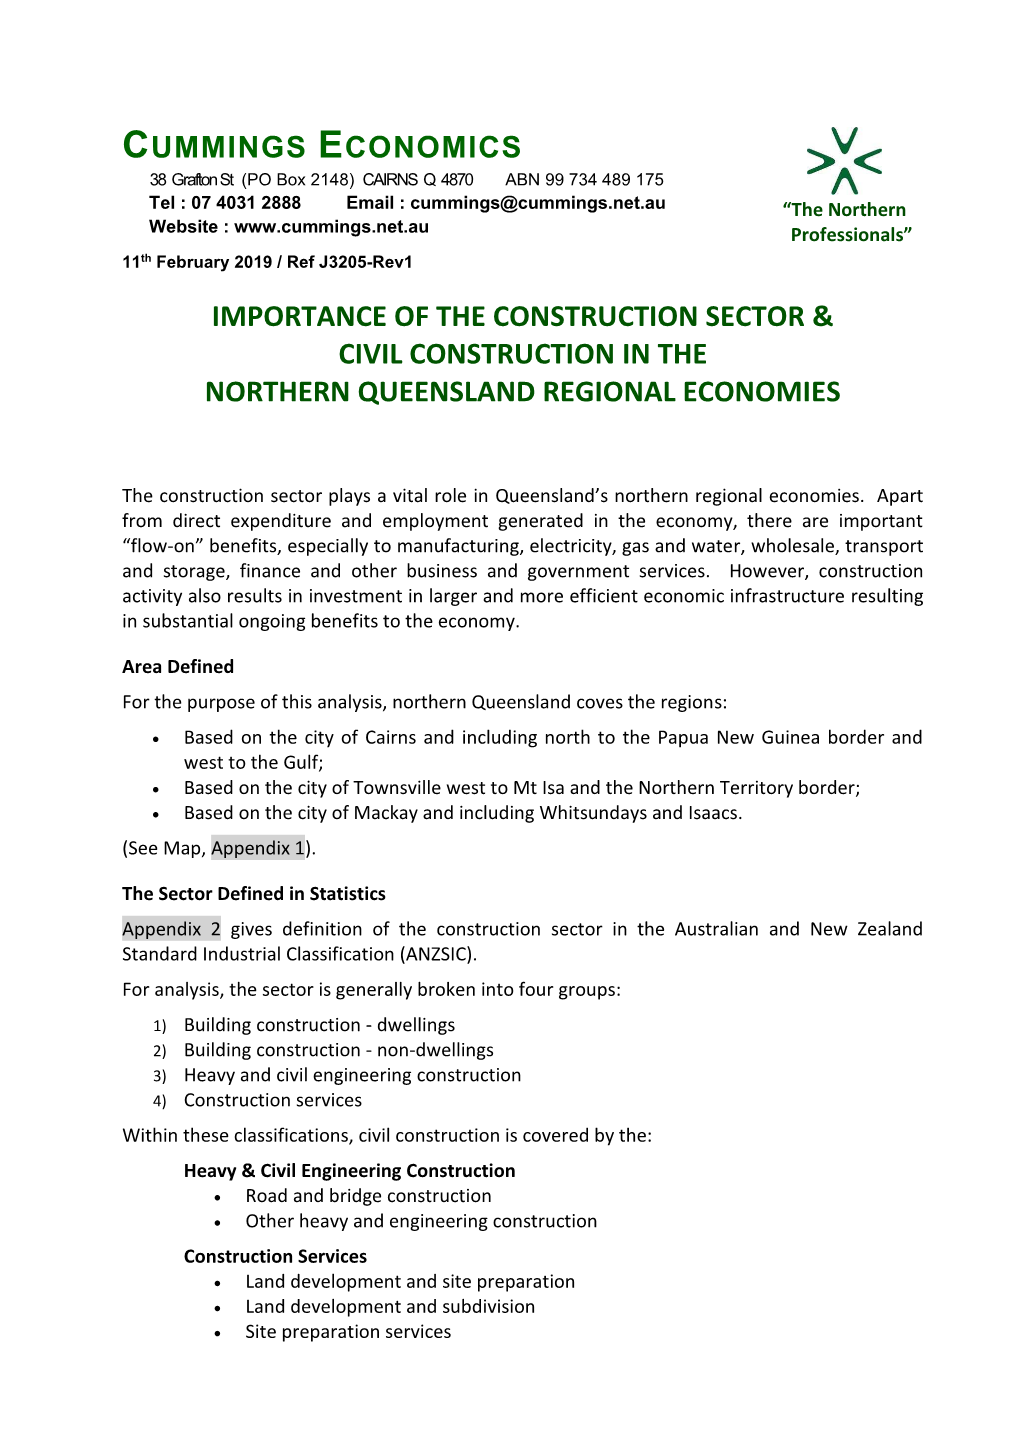 Importance of the Construction Sector & Civil Construction in the Northern Queensland Regional Economies